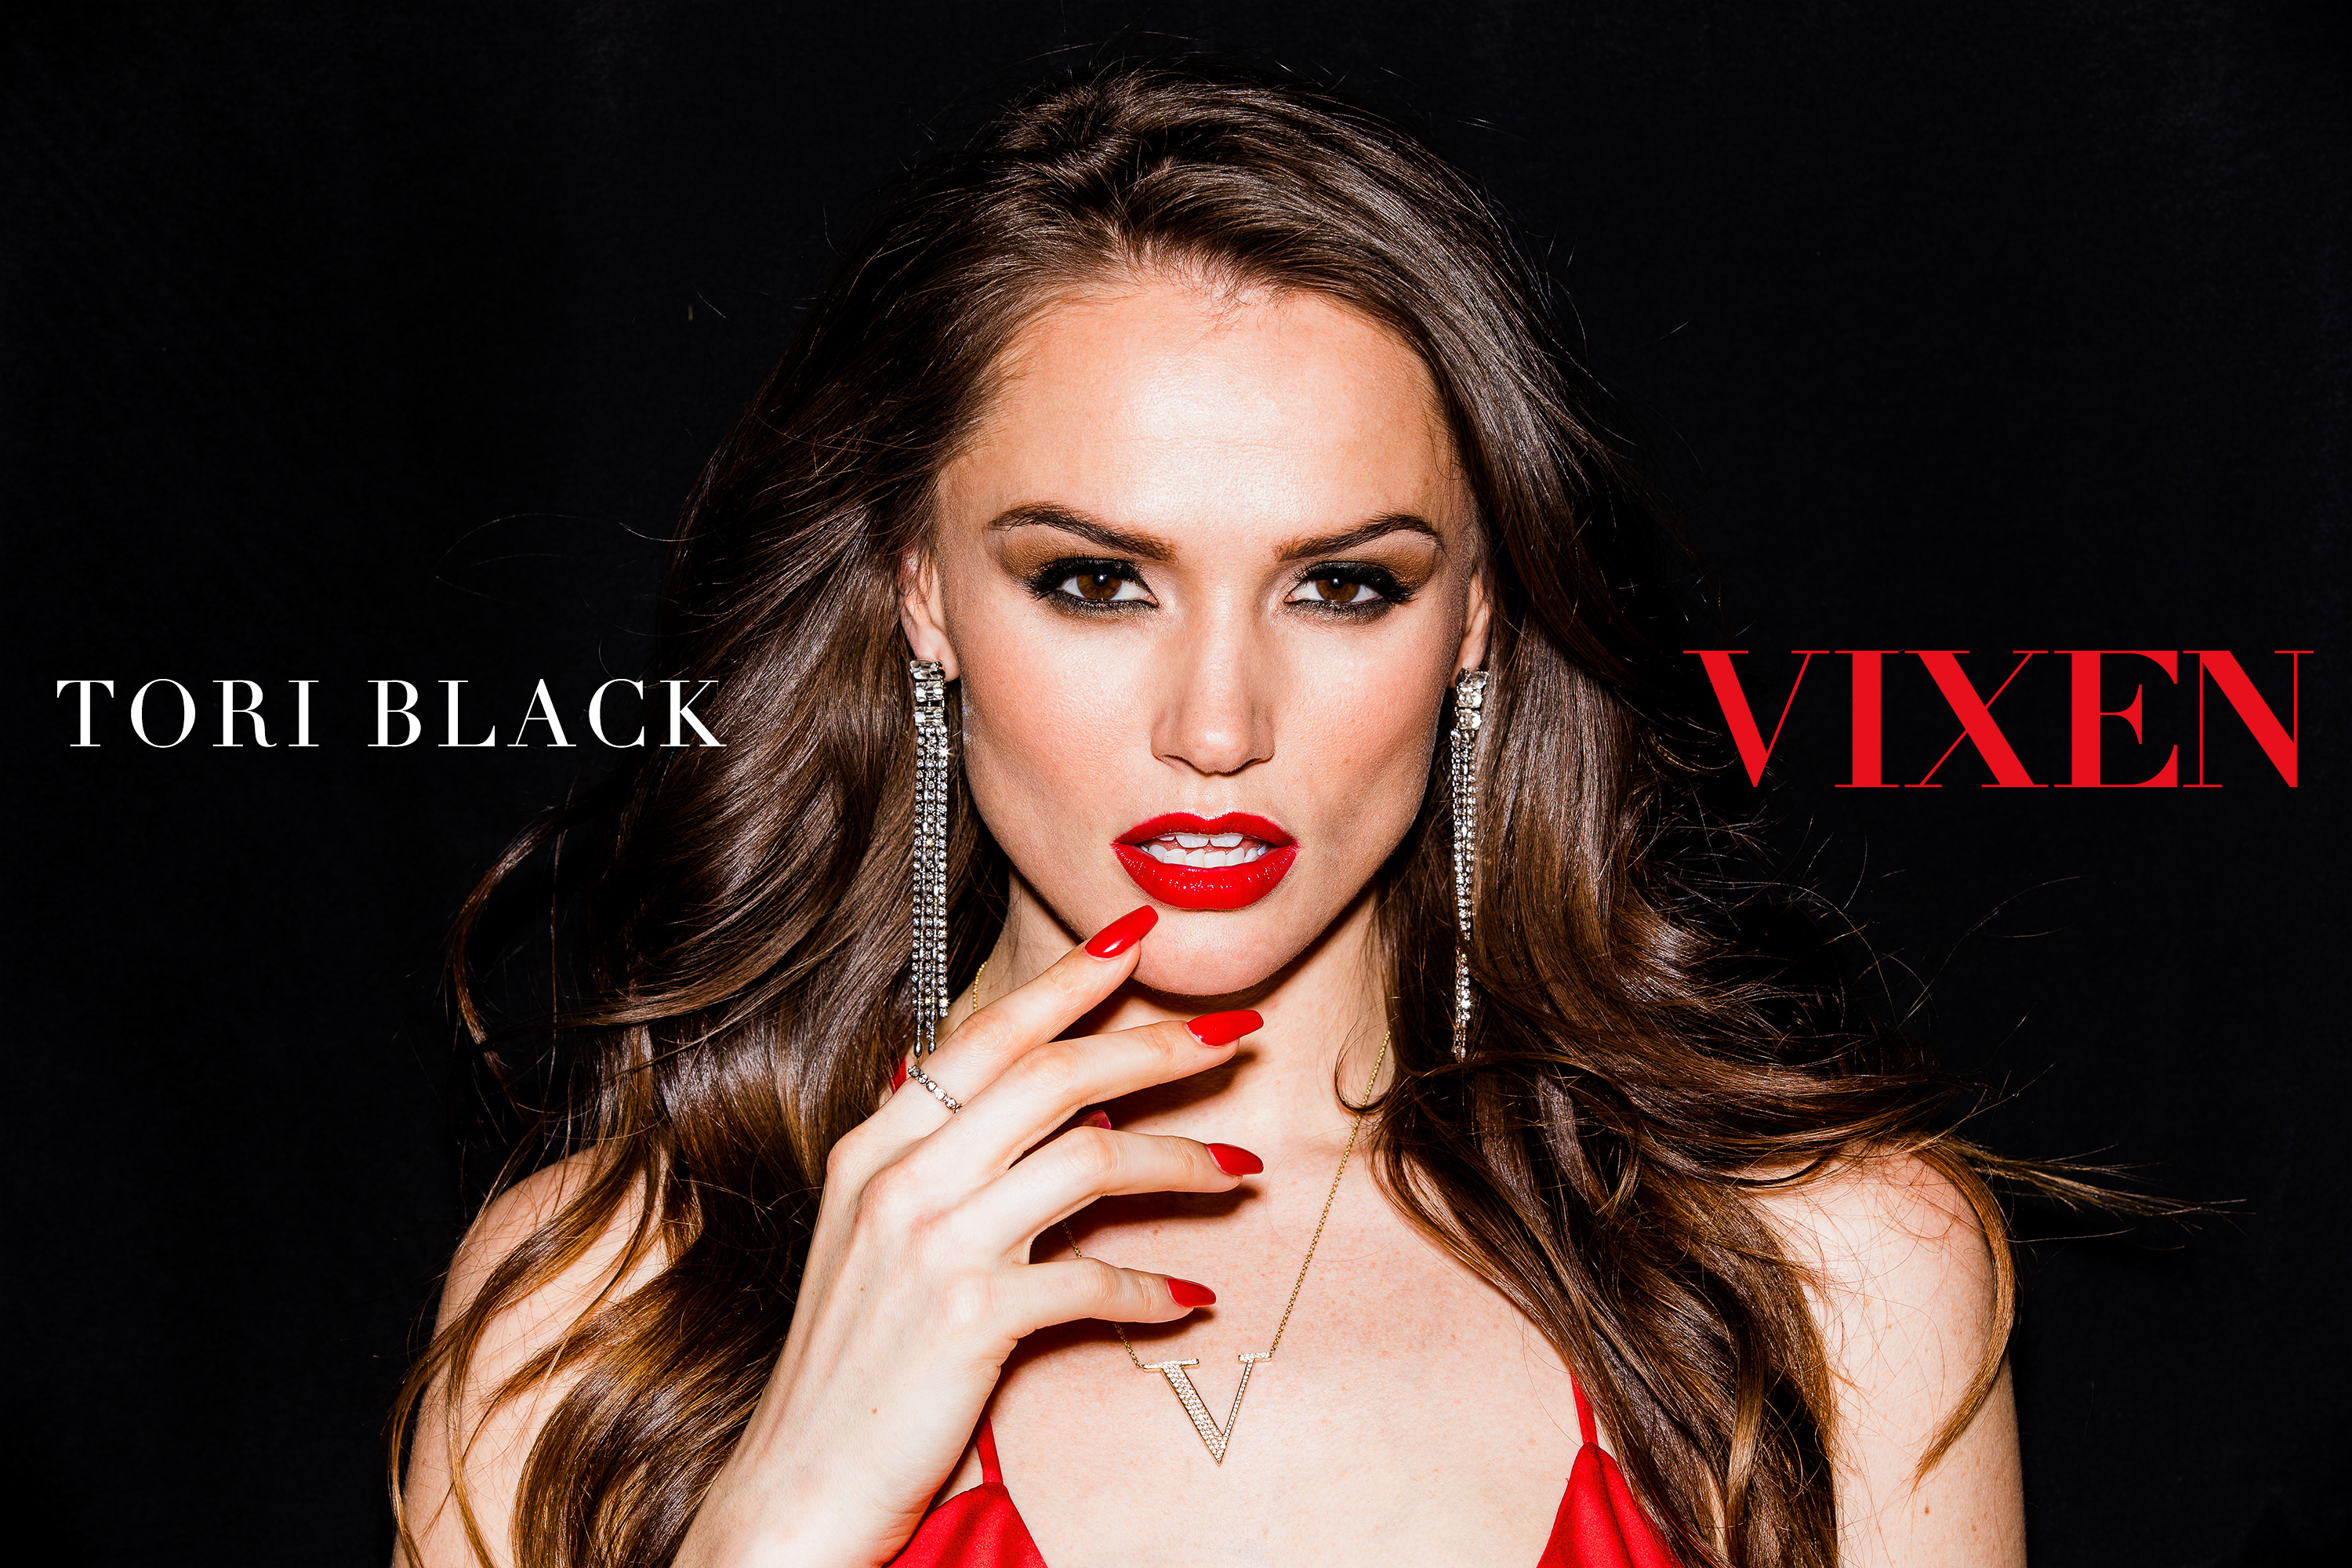 NEW! TORI BLACK IS BACK! MMF THREESOME! NATURAL TITS! BUBBLE BUTT! SIMULTANEOUS OPEN MOUTH FACIALS! [Openload Streaming]